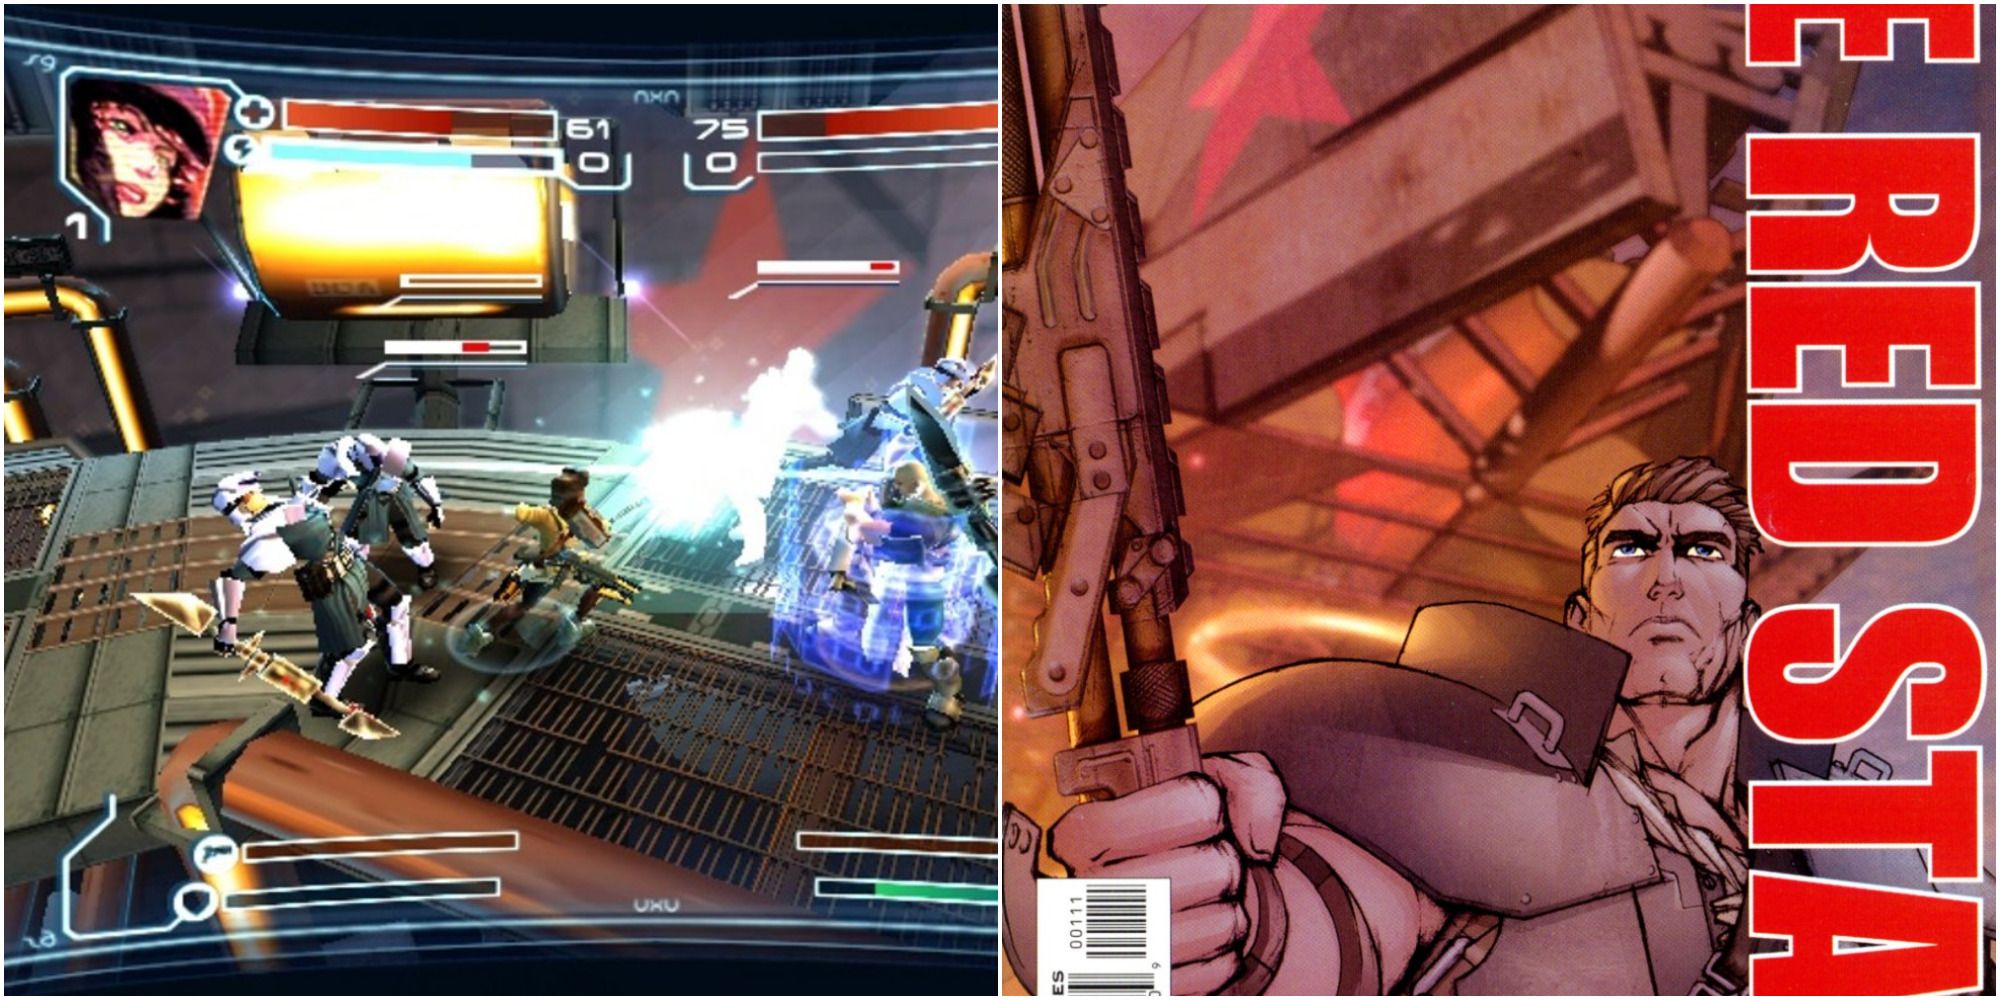 A comparison of gameplay footage from The Red Star for the PS2 - showing characters battling on a metal grate - and the cover art for the first issue of Christian Gossett's The Red Star comic